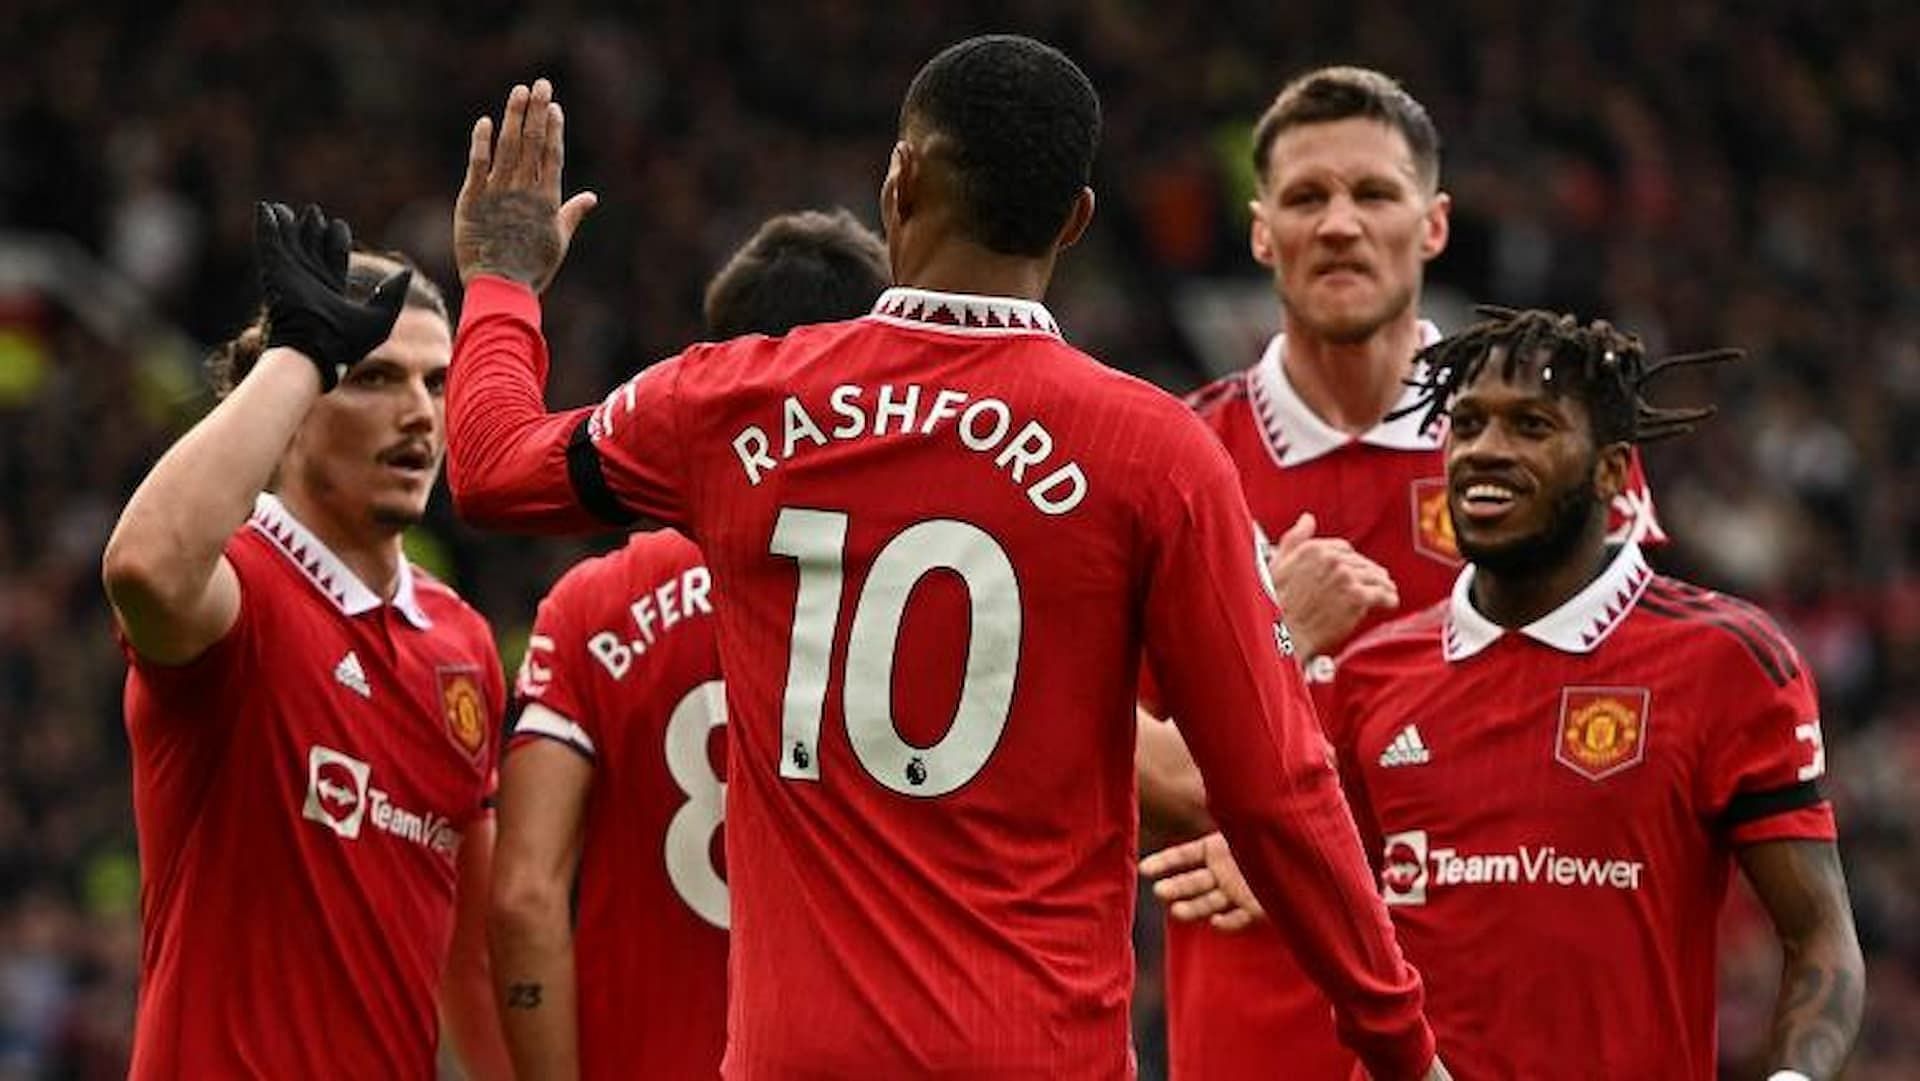 Manchester United celebrating a goal (Image via Getty)